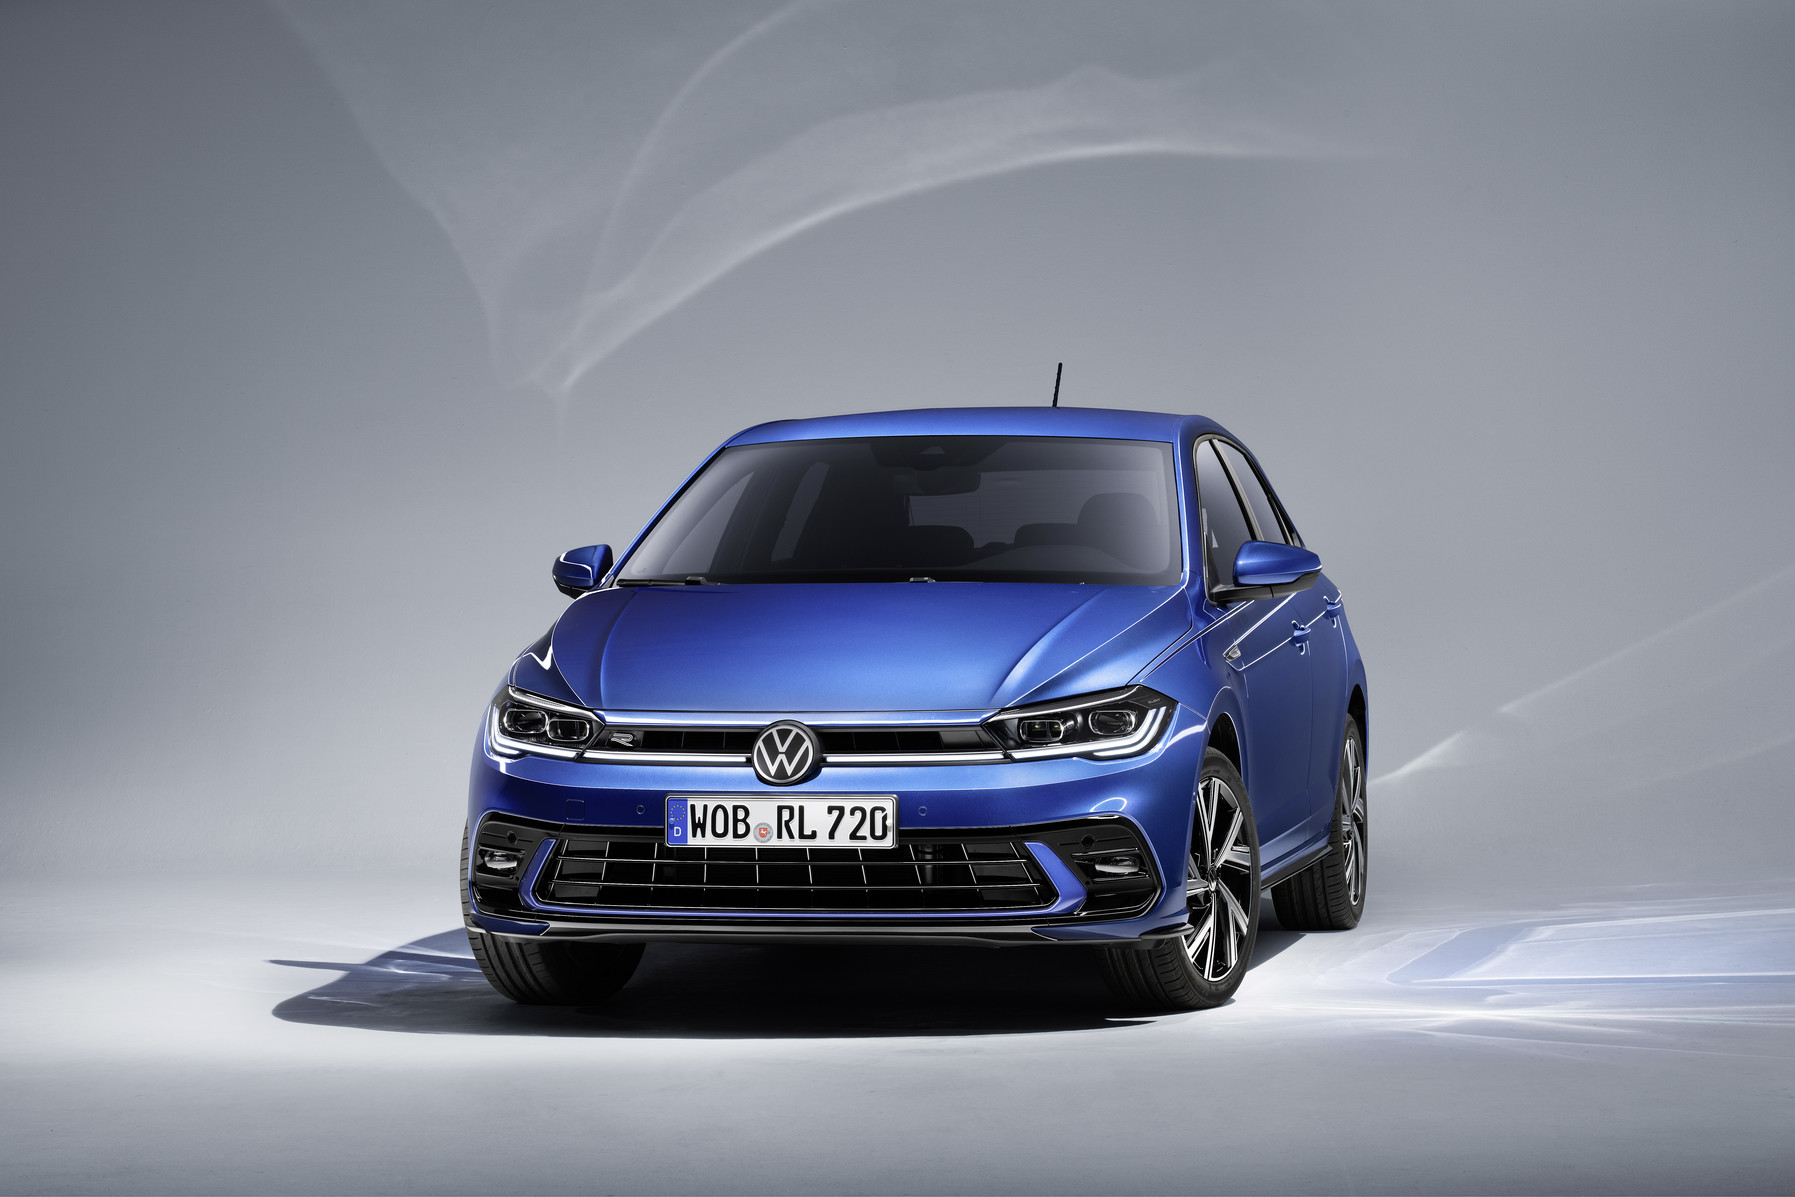 World premiere for the new Volkswagen Polo partly automated driving